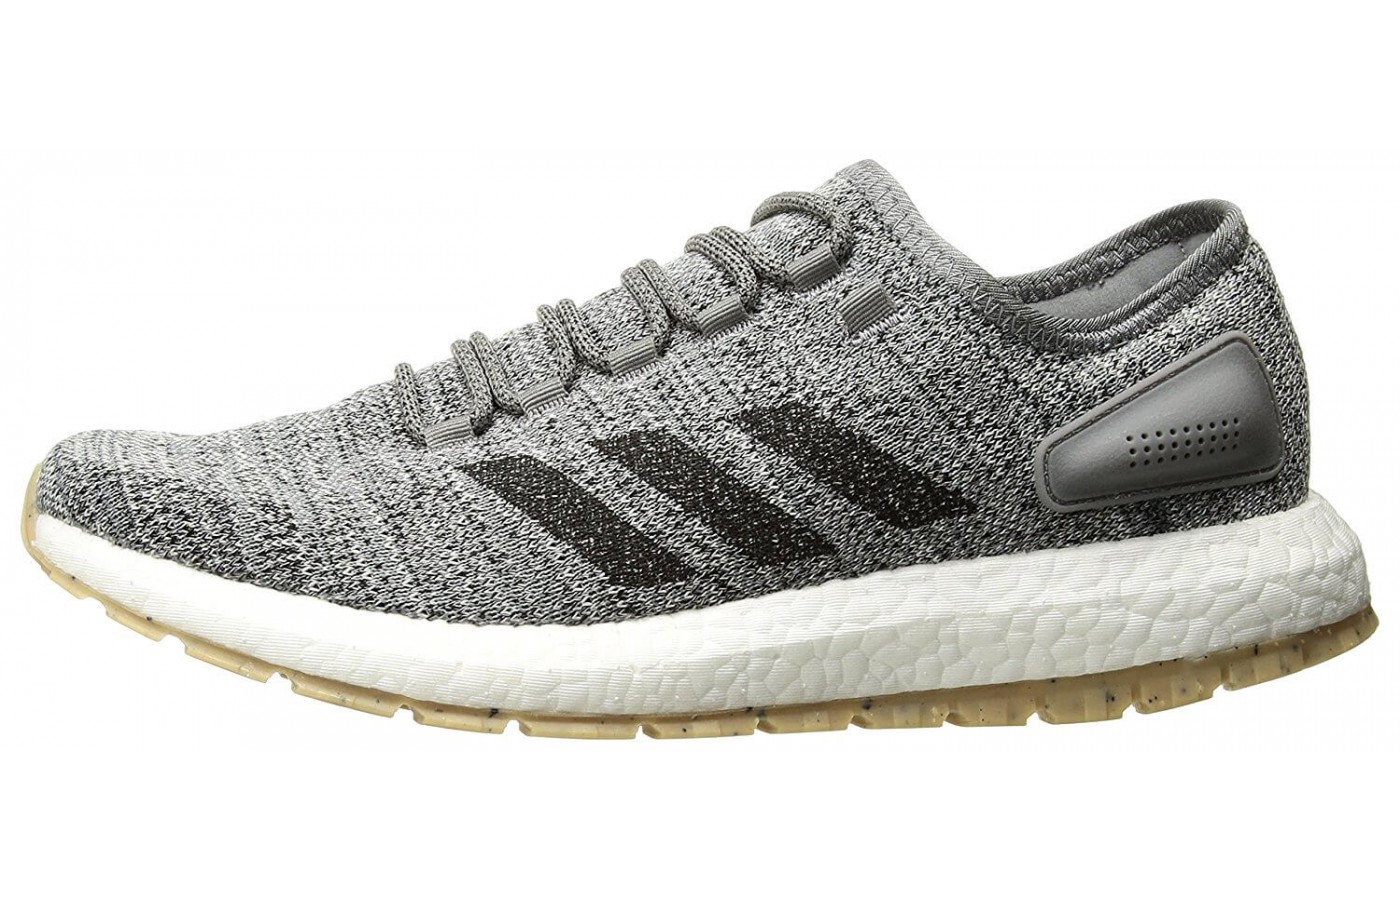 The lateral side of the Adidas Pureboost All-Terrain.